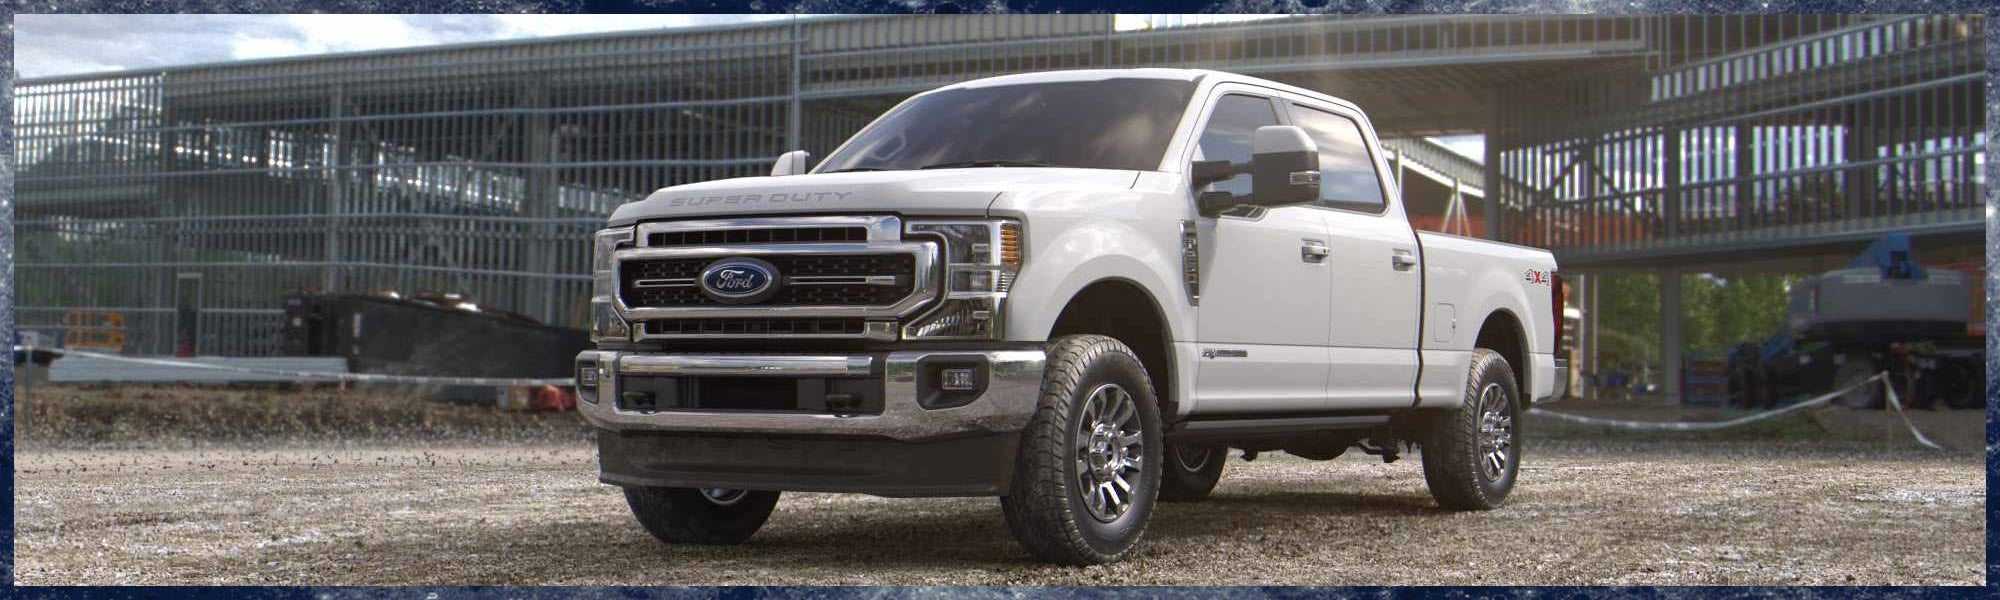 Ford F250 Trim Levels Explore The Dynamic Features & Cabin Styles